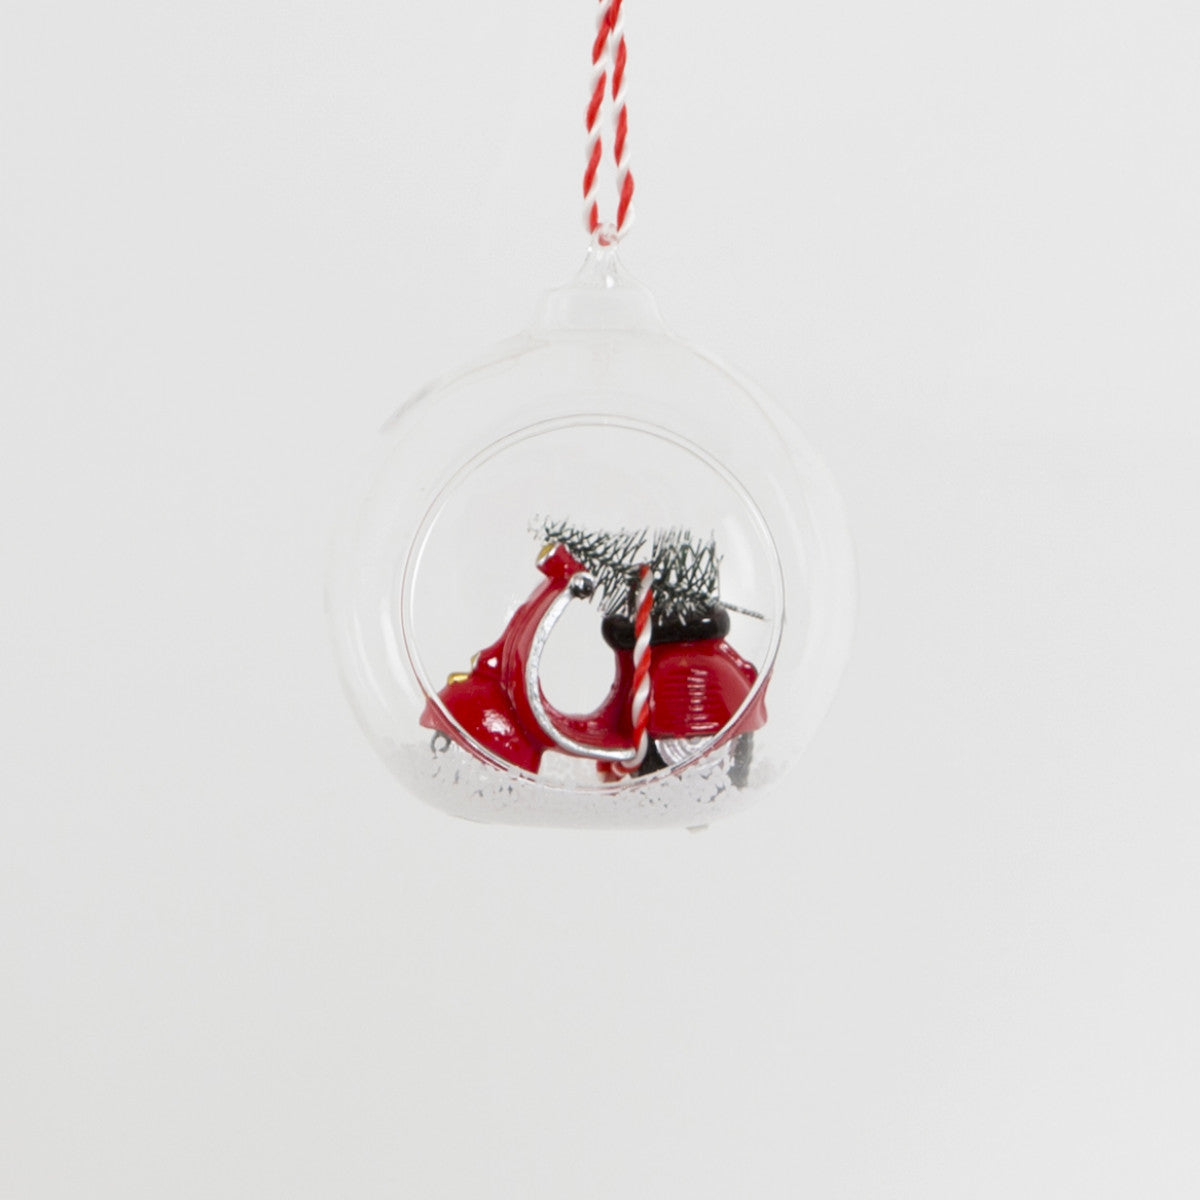 Open glass bauble with a red and white scooter carrying a Christmas tree in the snow.